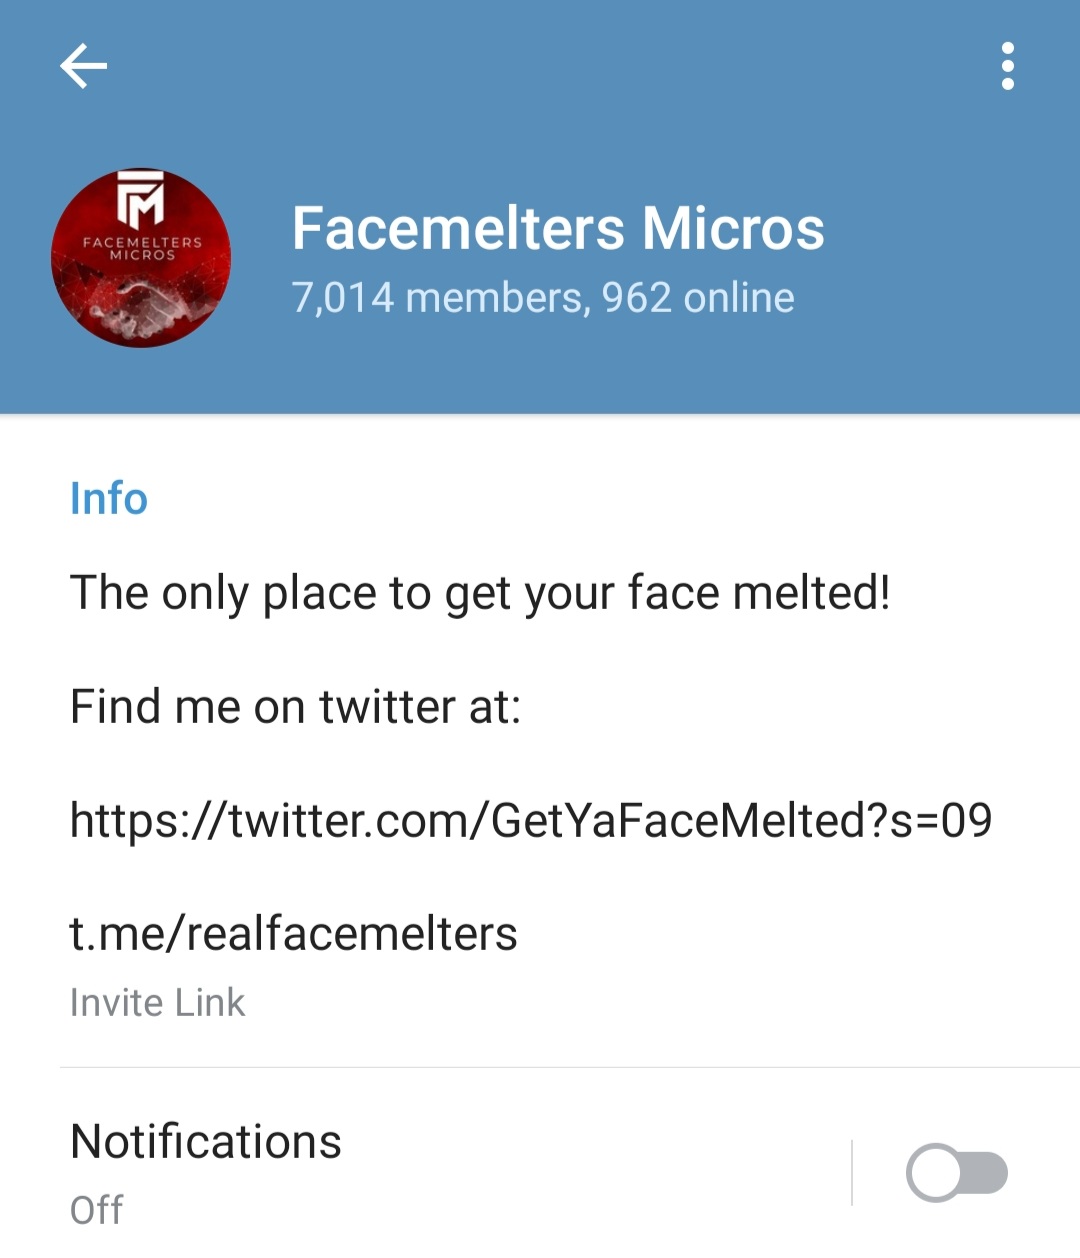 Facemelters Micros complaint Cryptocurrency scam